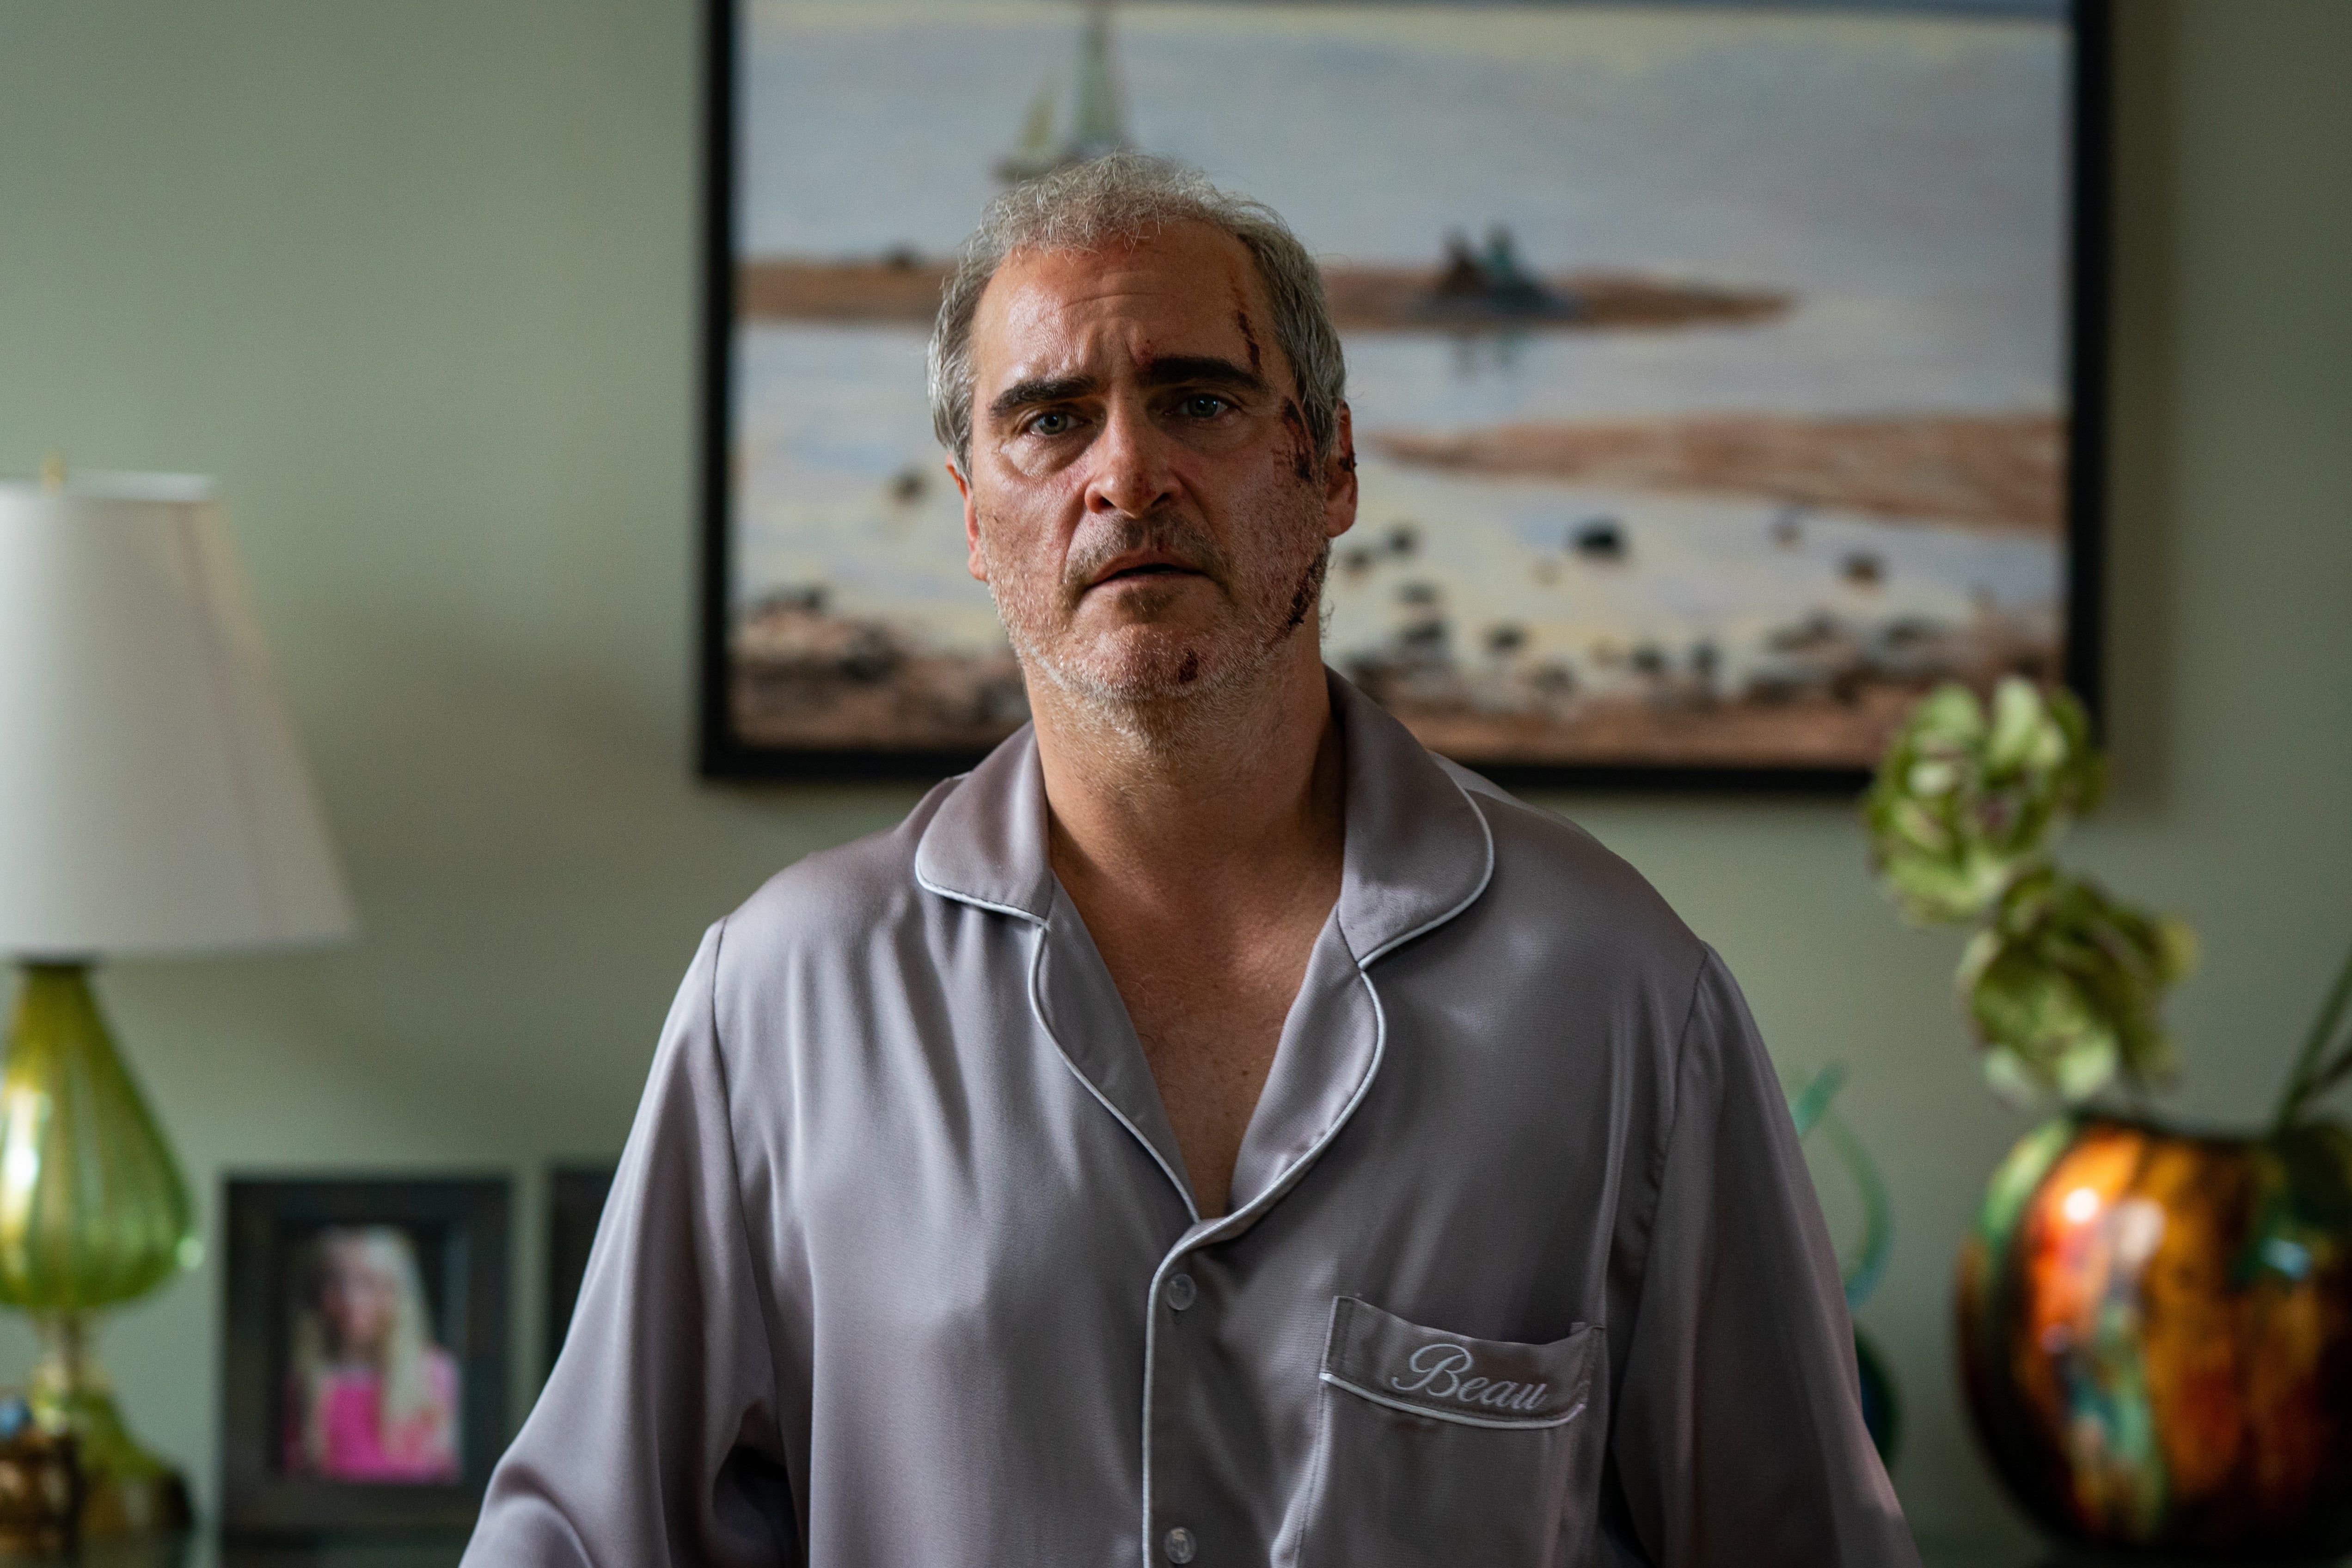 A scraped up Joaquin Phoenix stands in silk pajamas labeled "Beau." He looks confused.